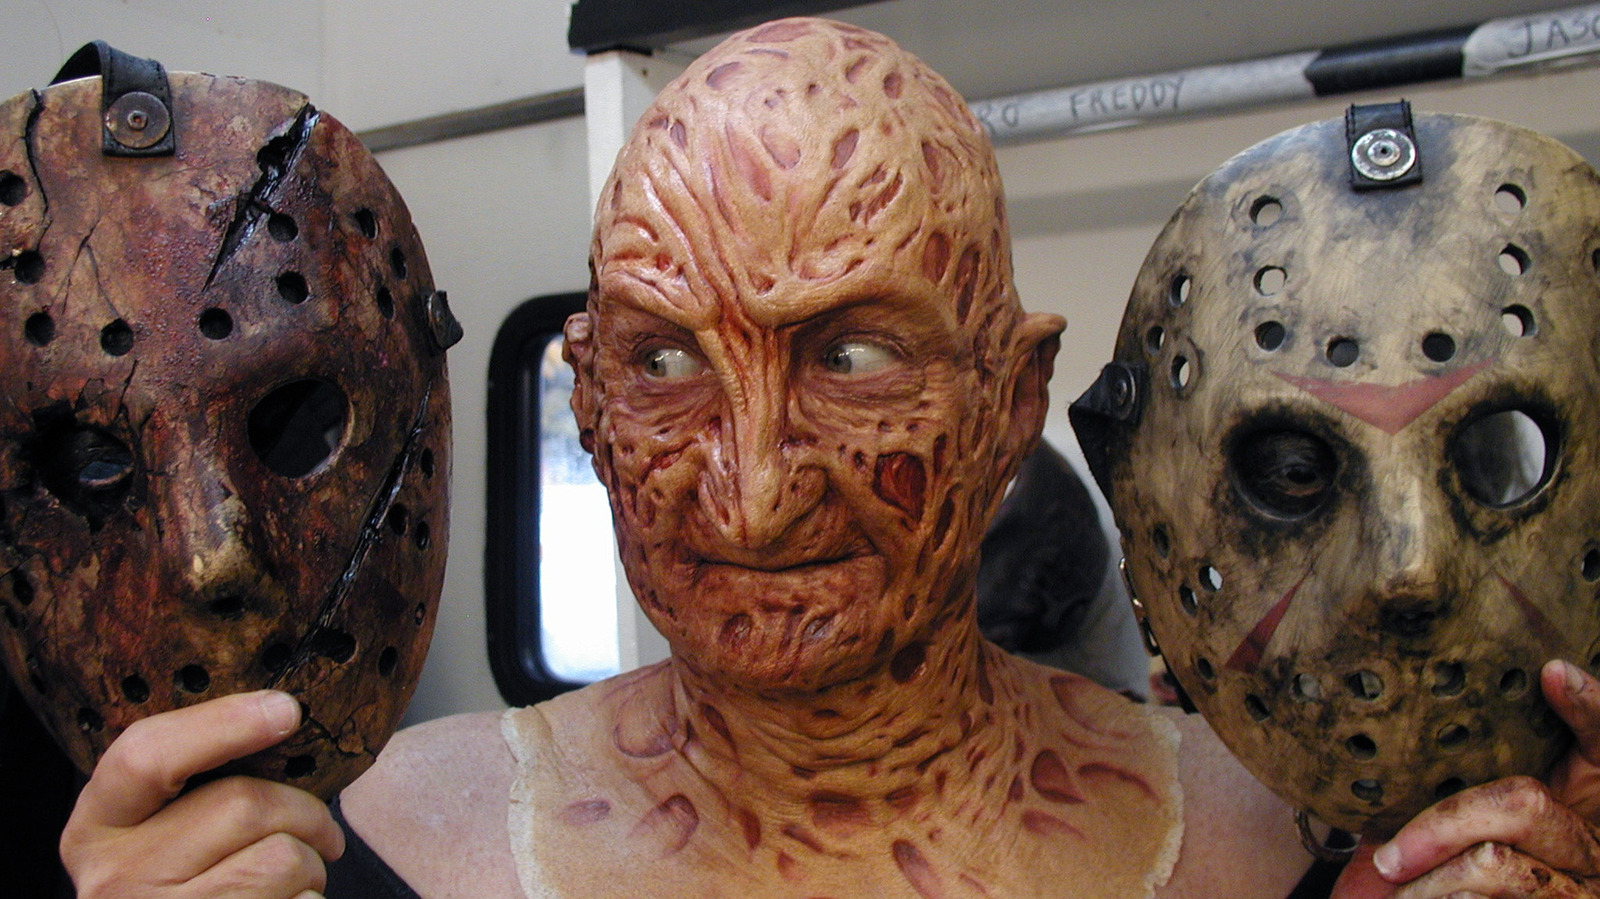 Wes Craven Was Angry With Robert Englund Embracing The Funnier Side Of Freddy Krueger – Exclusive